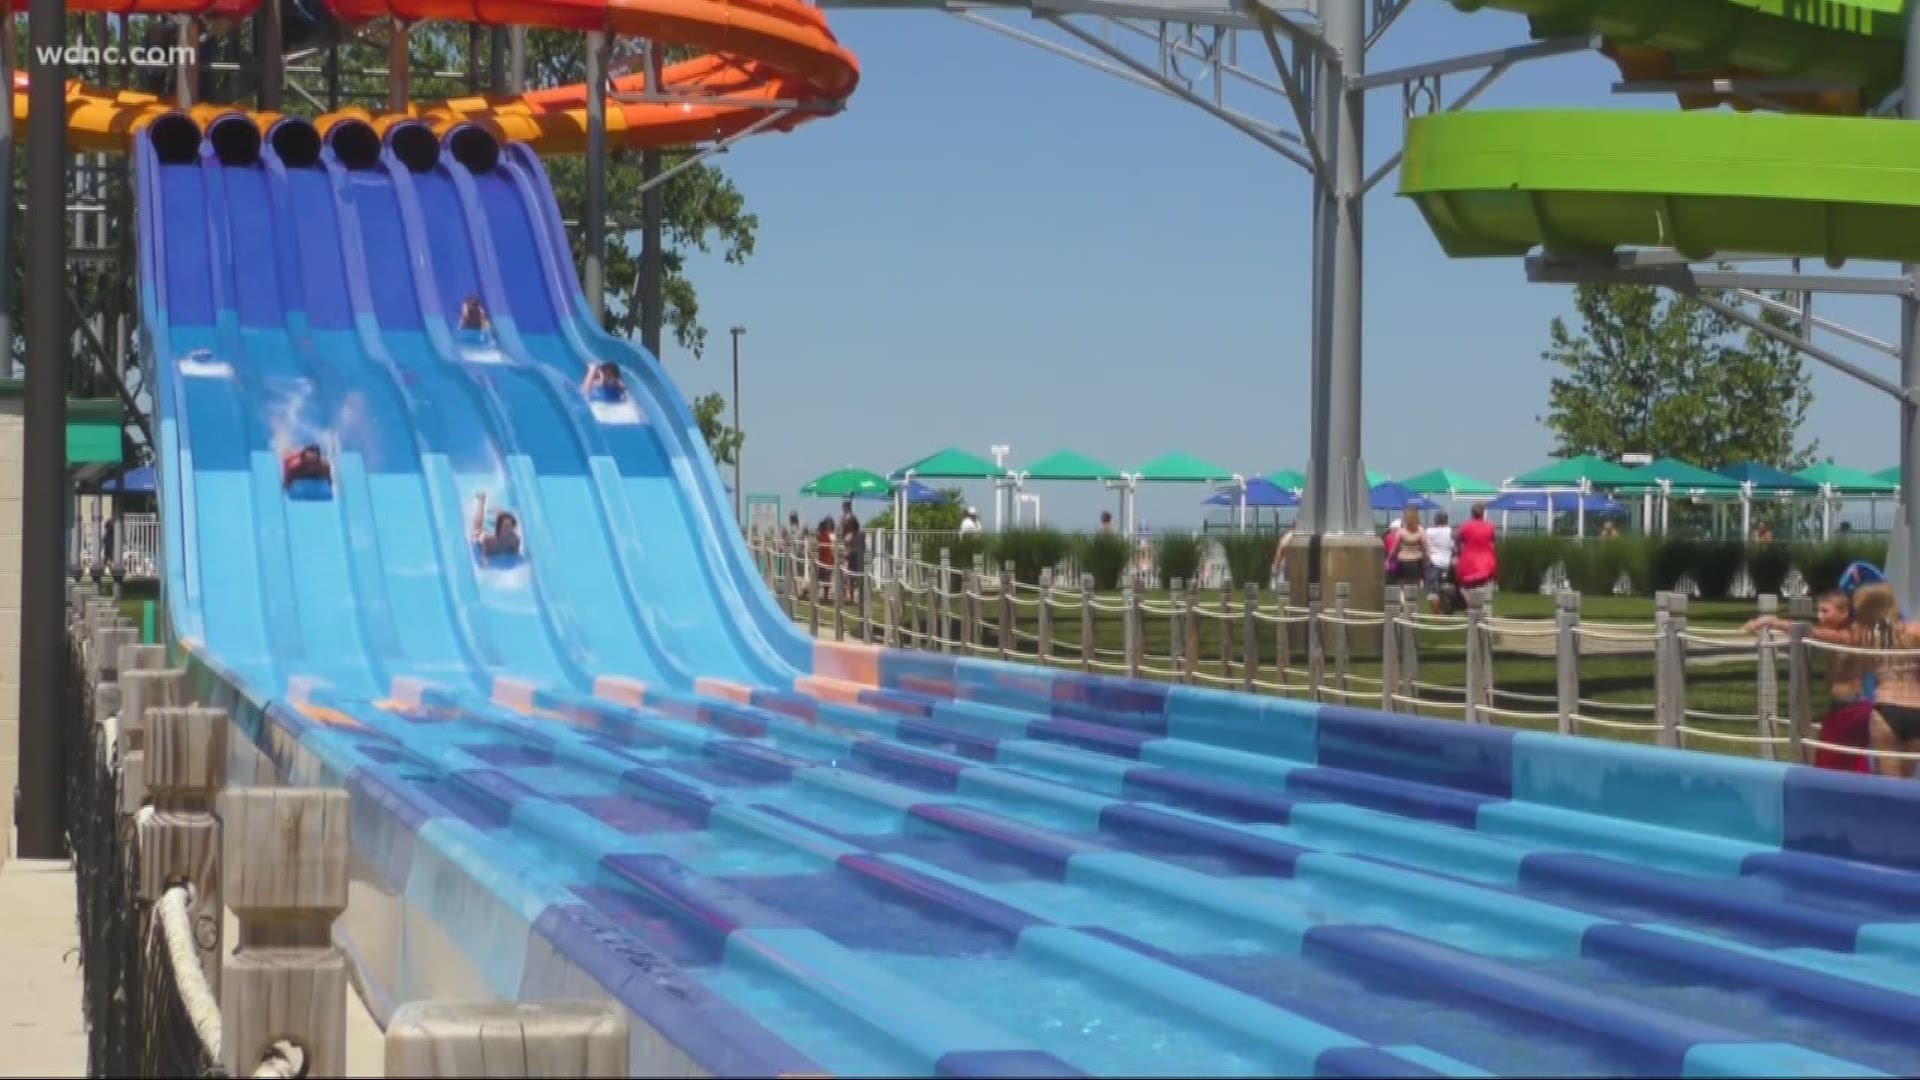 Boogie Board Racer Coming To Carowinds In 2020 Wcnc Com - the water slide team roblox